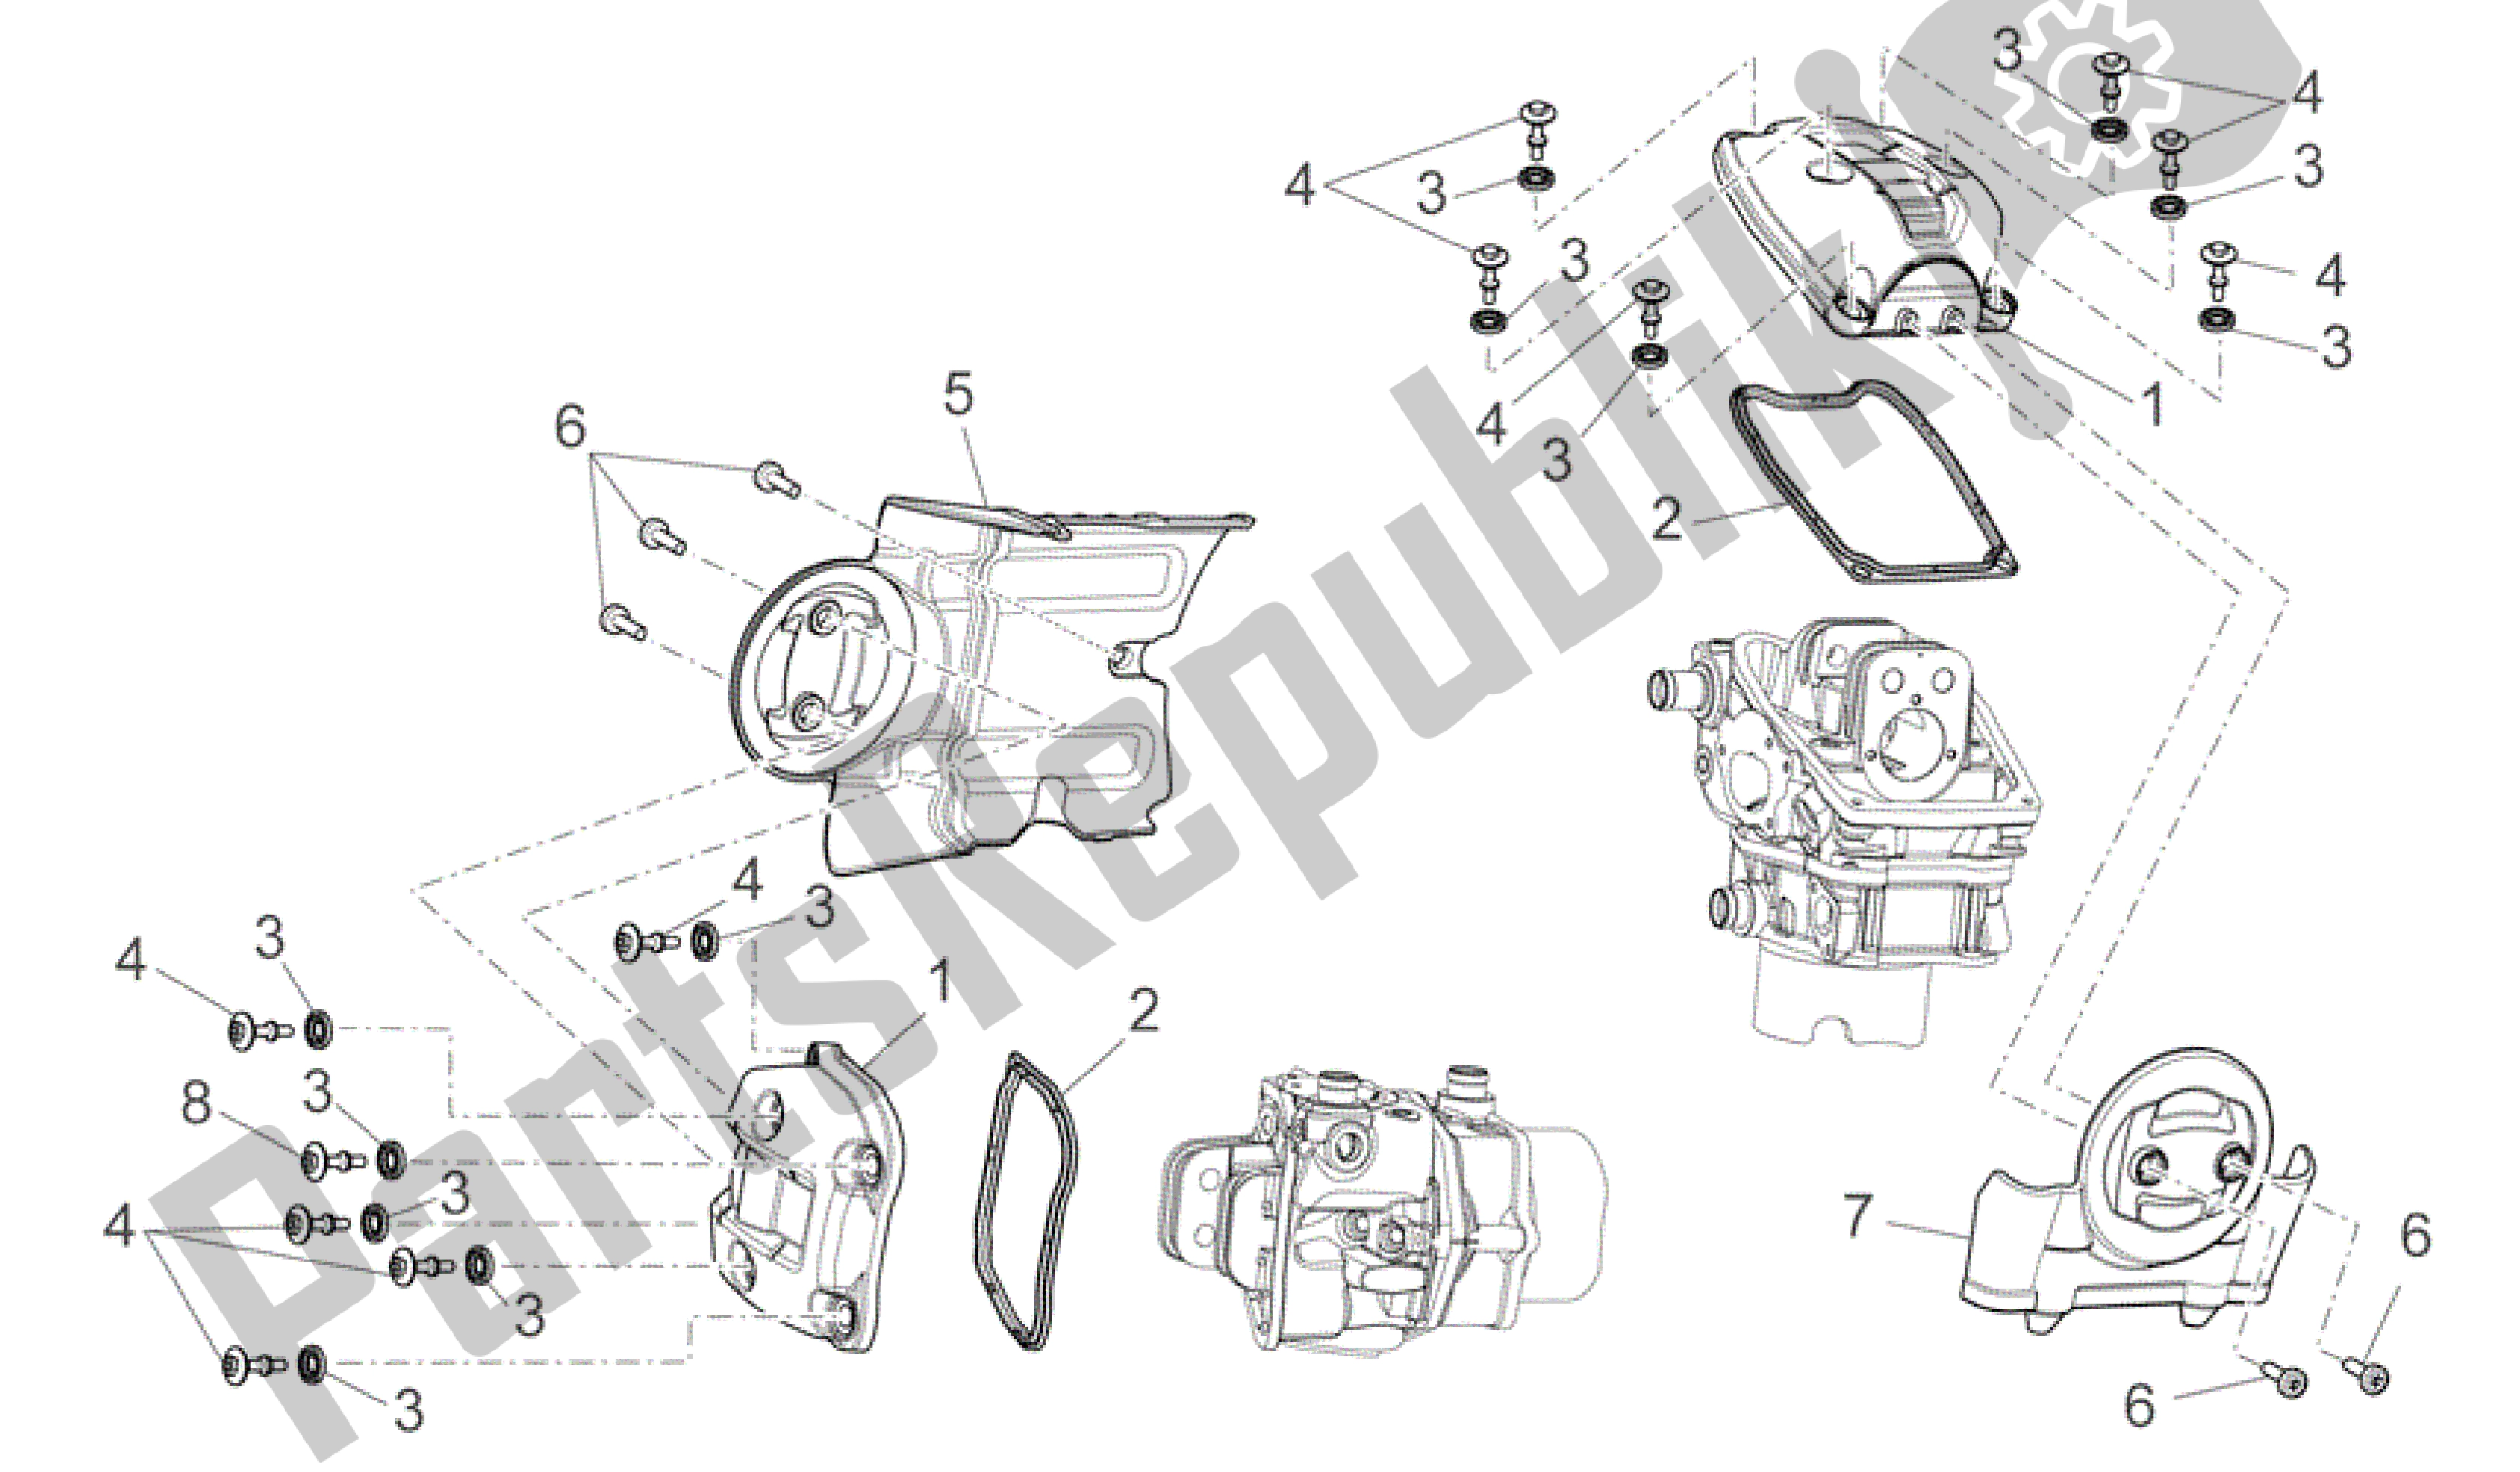 All parts for the Valves Cover of the Aprilia Mana 850 2007 - 2011